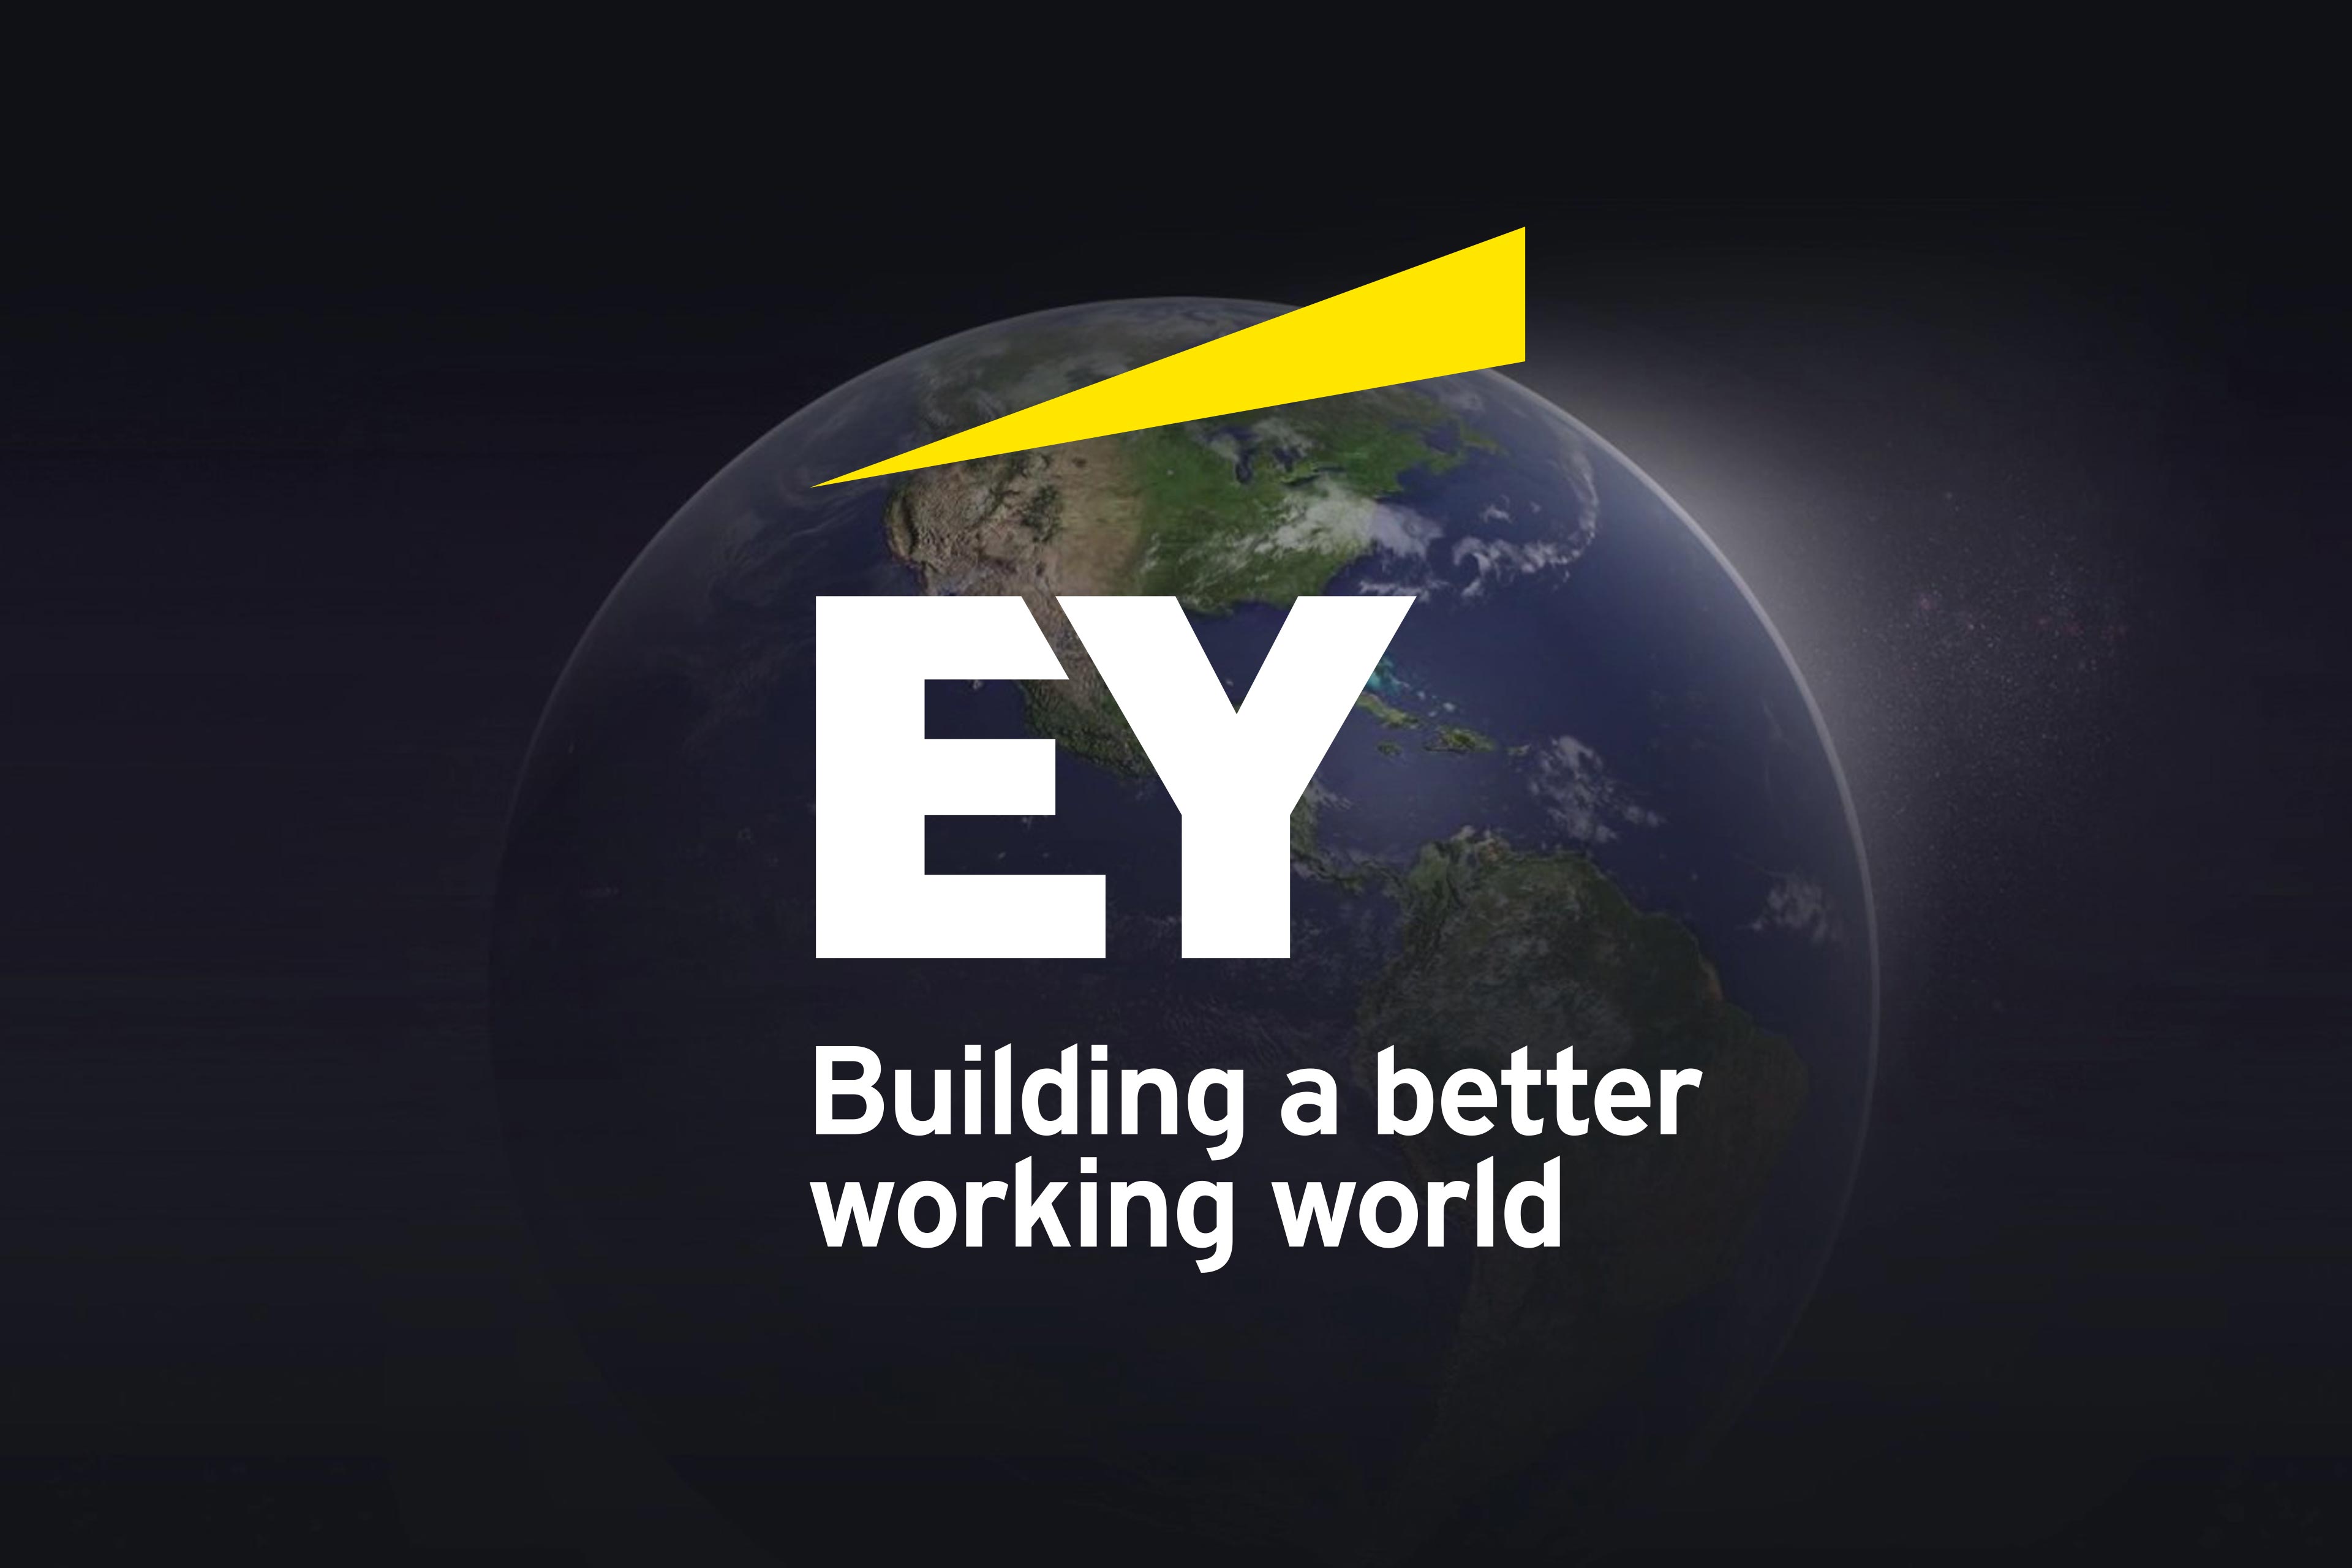 Work world life. Building a better working World. Ey building a better working World. Better World. Ey.